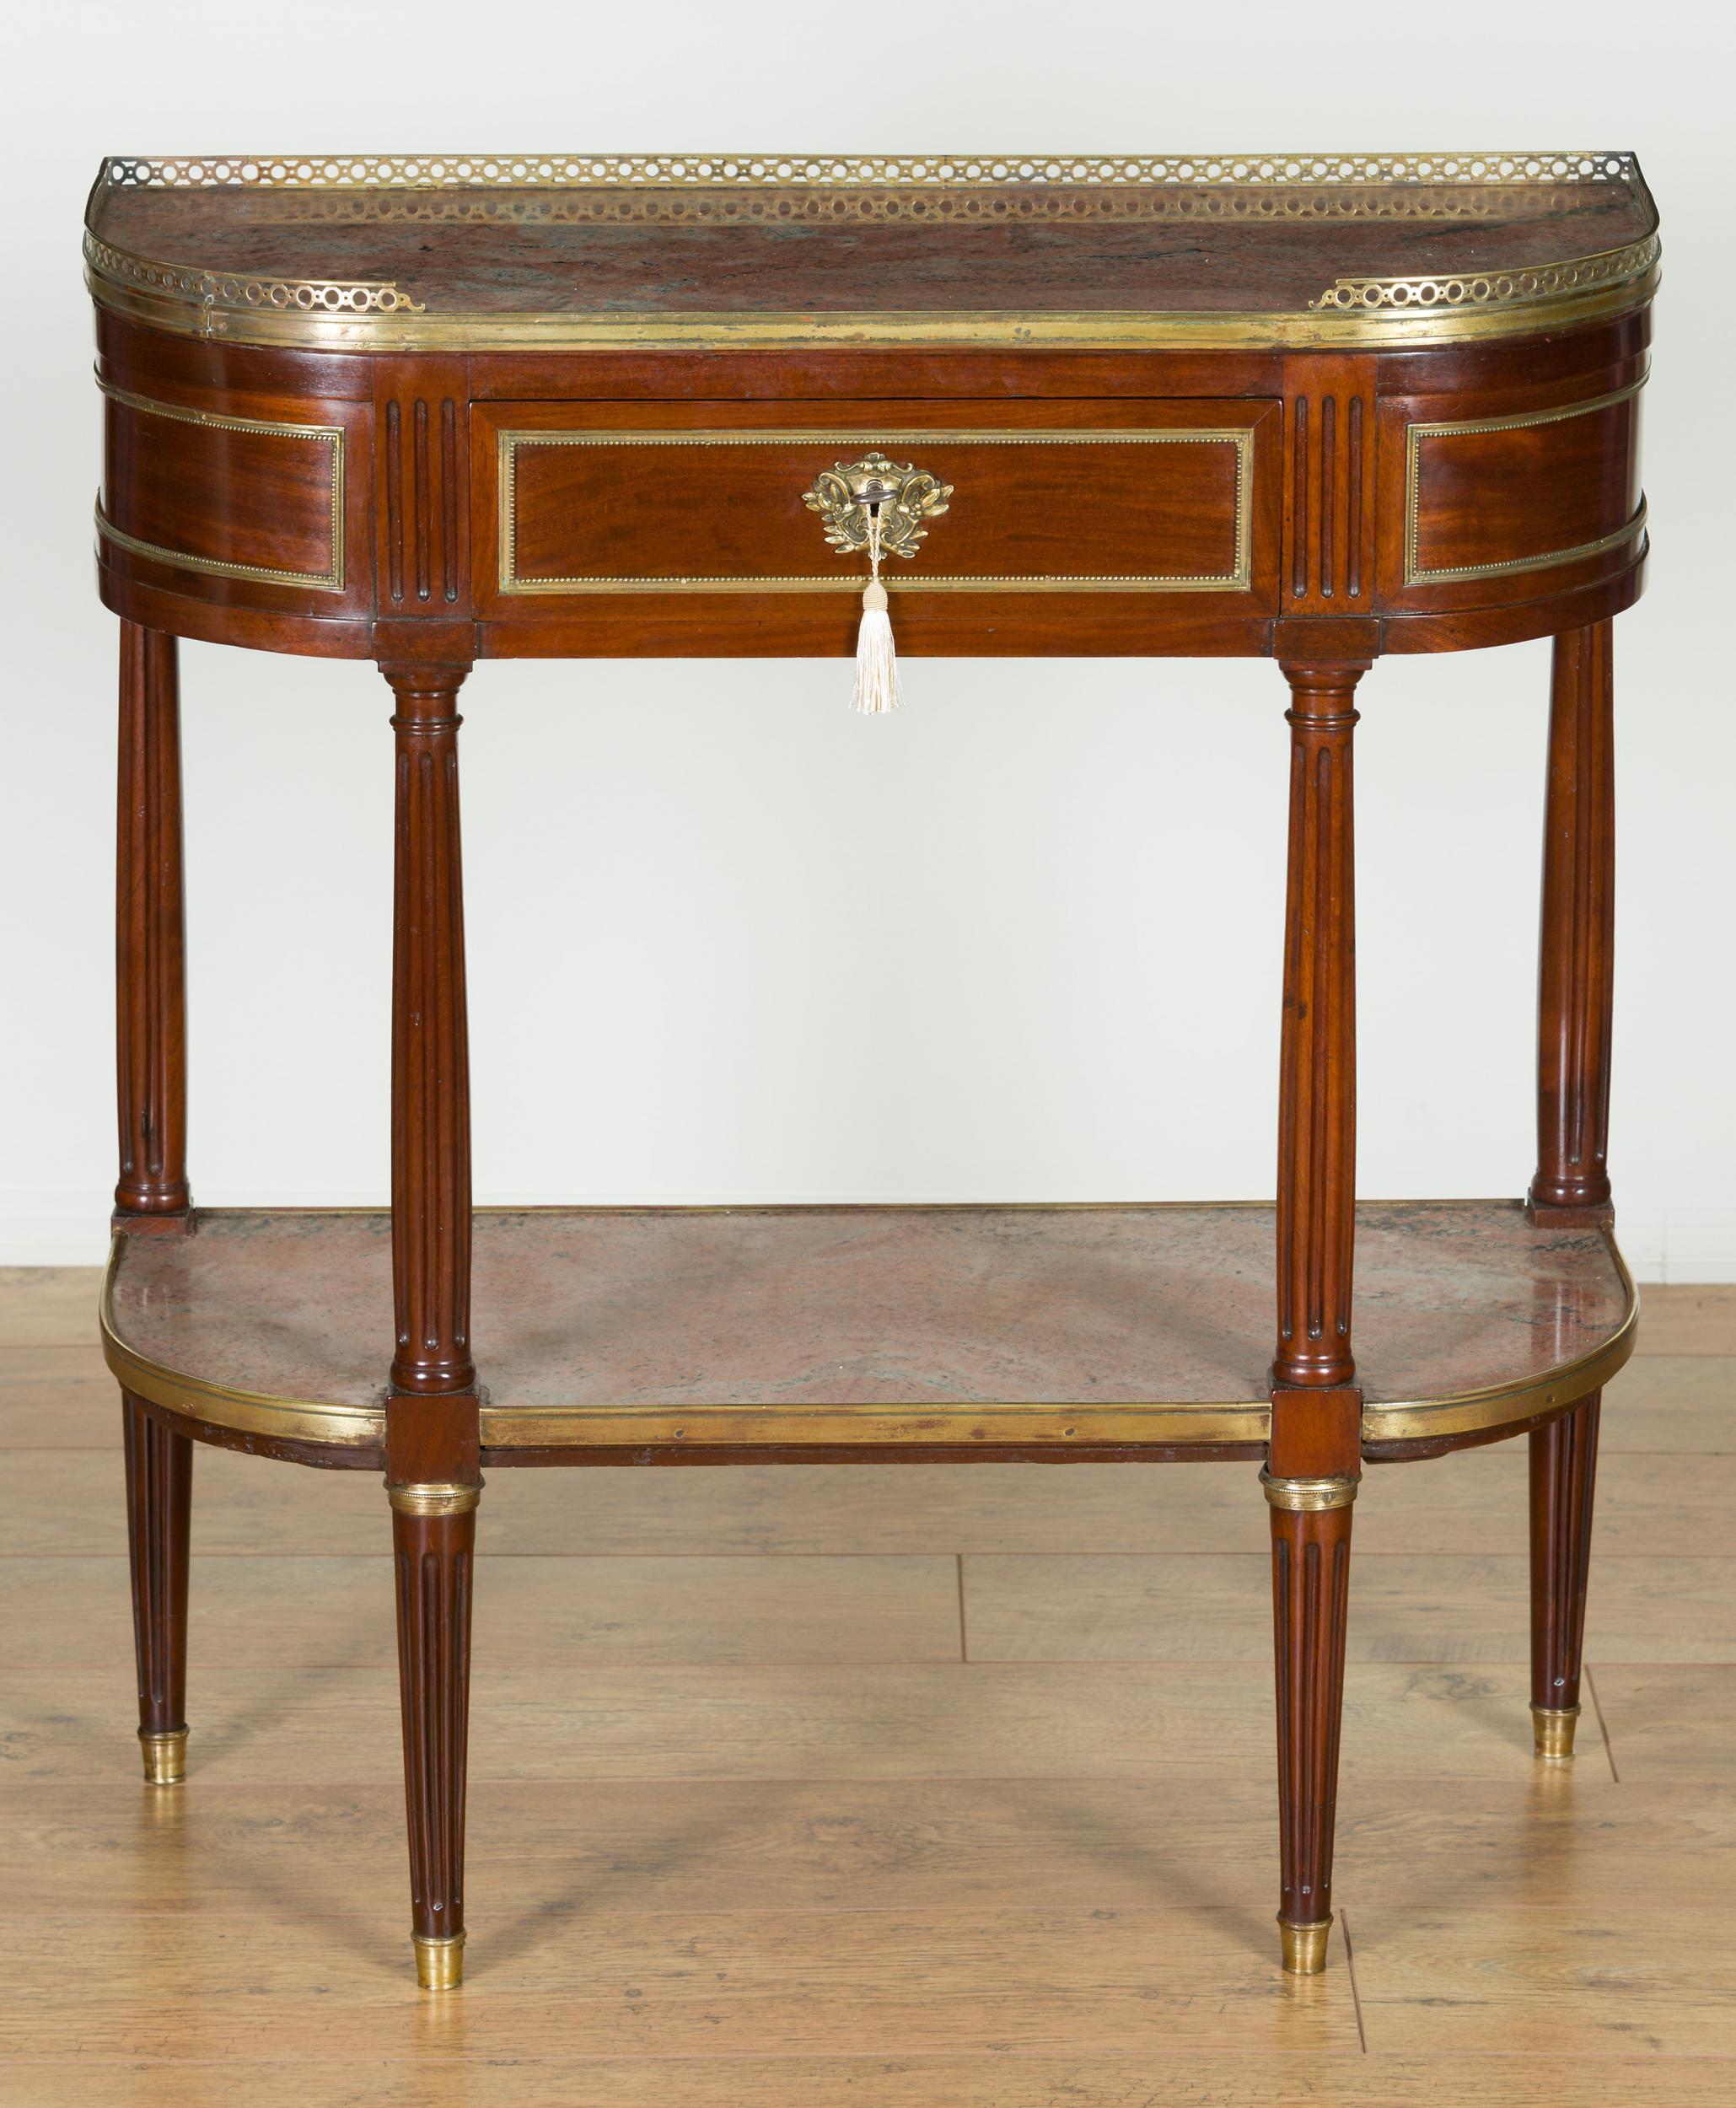 French side table in the manner of Gabriel Viardot.

French mahogany and gilt mounted side table in the manner of Gabriel Viardot.

Rouge marble top with three quarter gallery above a single blind frieze drawer.

Four fluted supports with